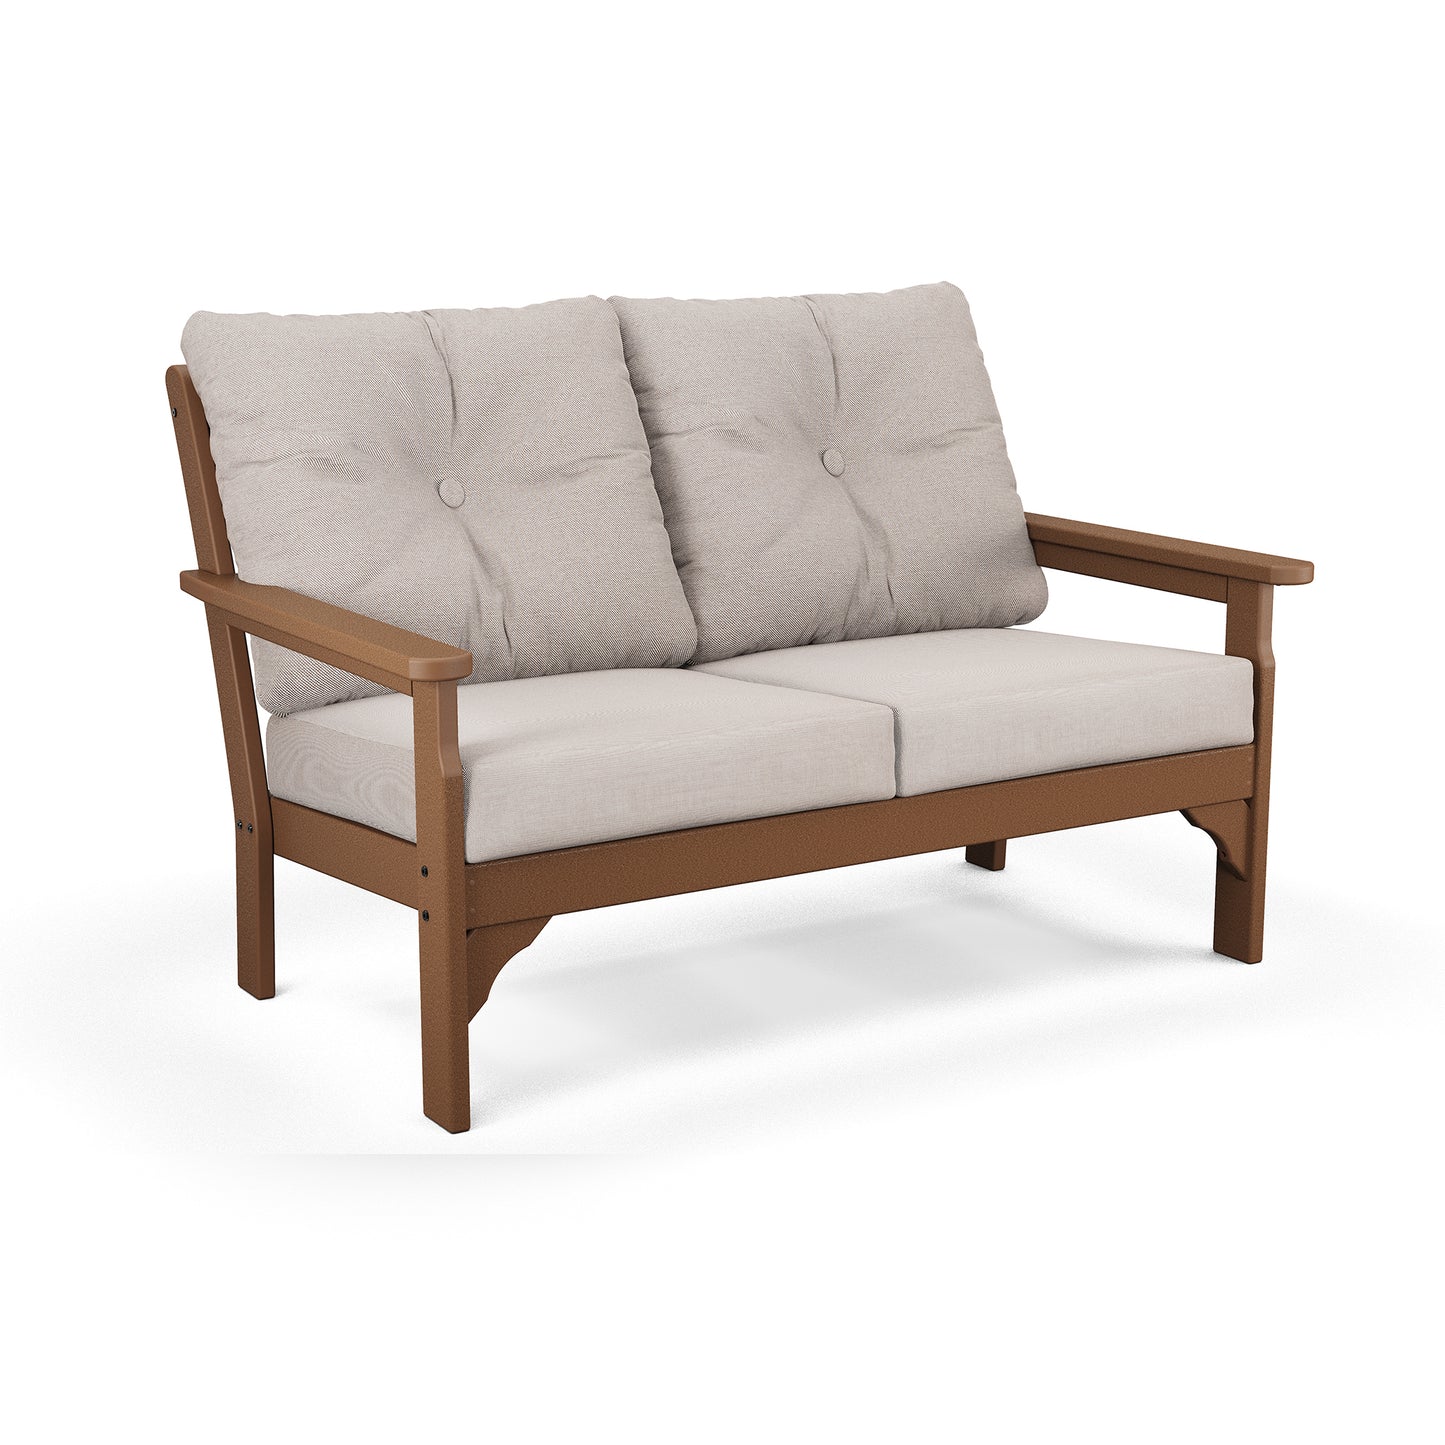 A two-seater POLYWOOD® Vineyard Deep Seating Settee with a light brown frame and beige cushions, set against a white background. The bench features a simple, modern design with three back cushions and two seat cushions.